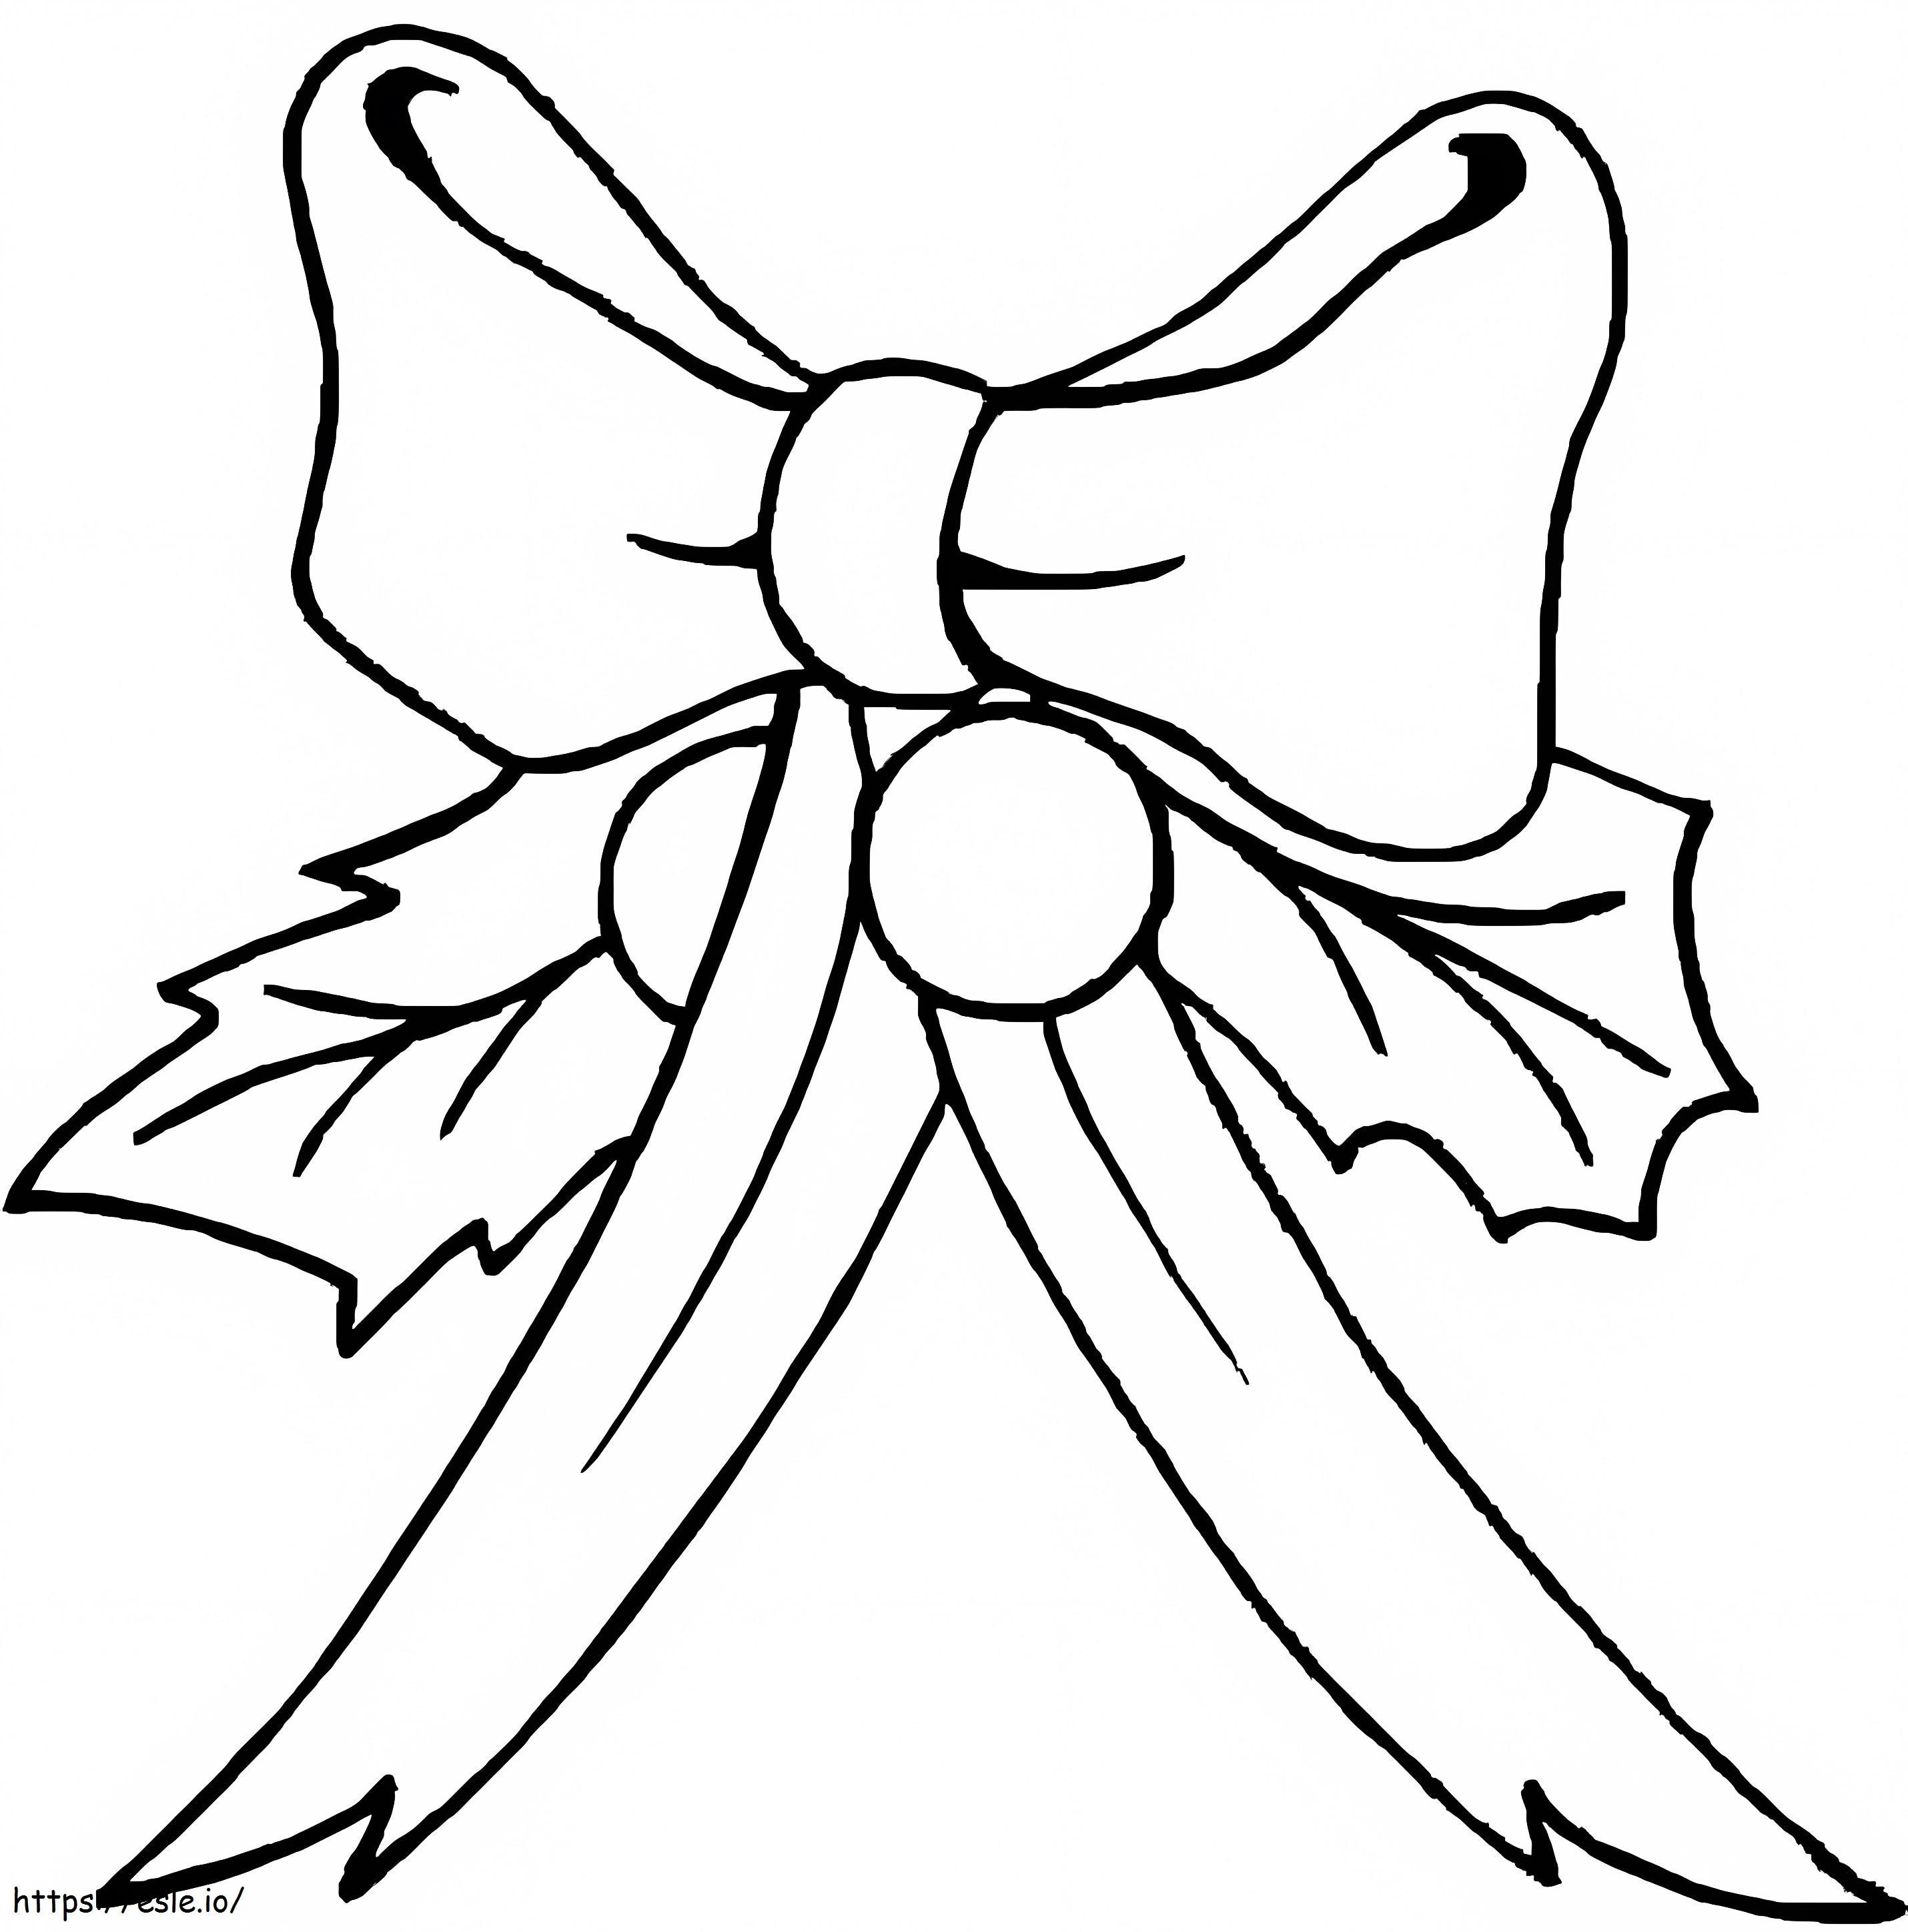 Christmas Bow coloring page